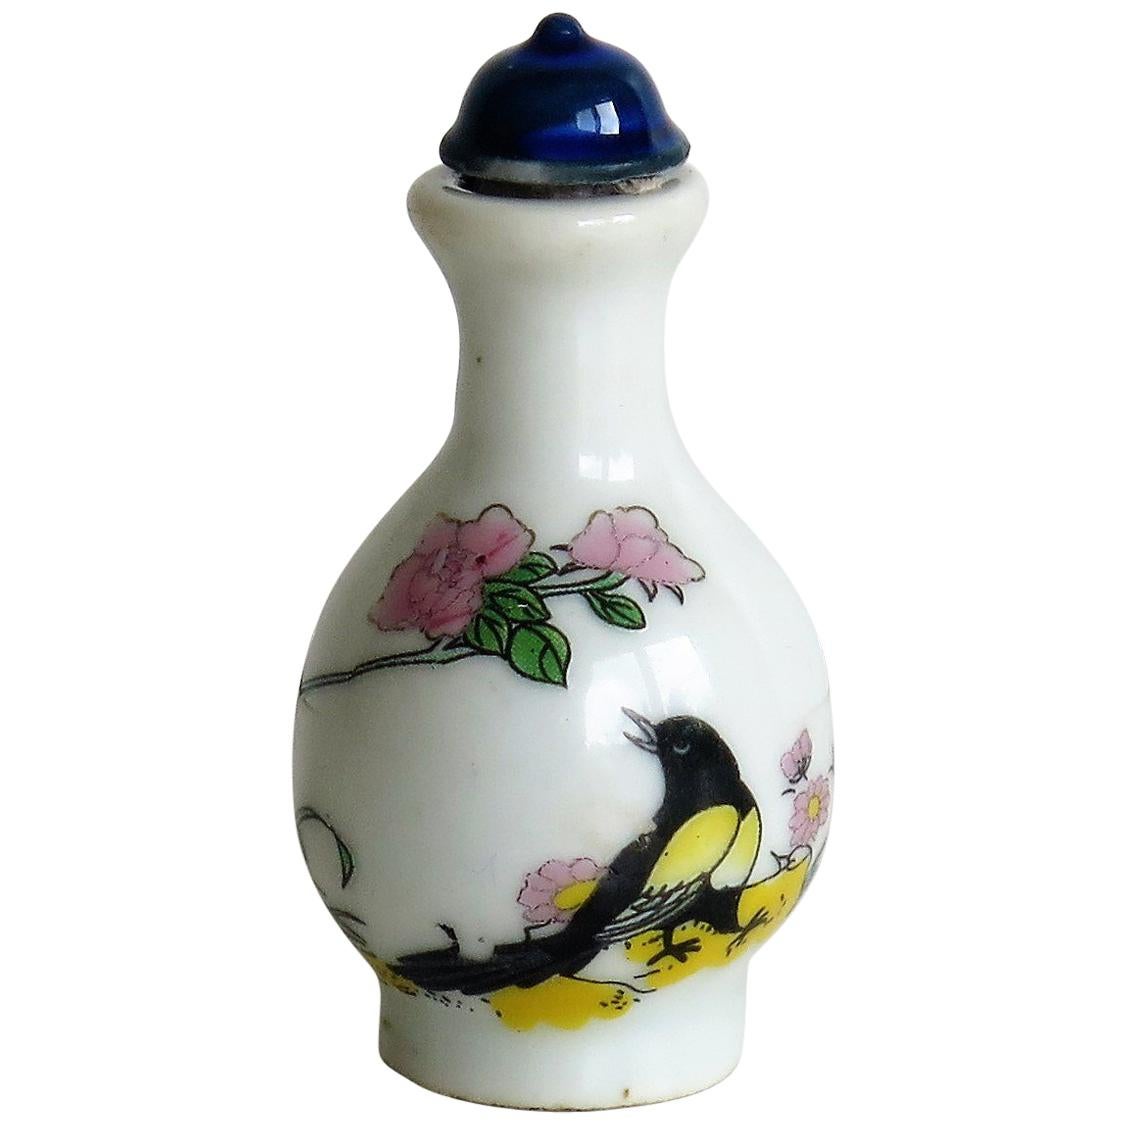 Chinese Porcelain Snuff Bottle, Hand-Painted Birds and Flowers, circa 1930